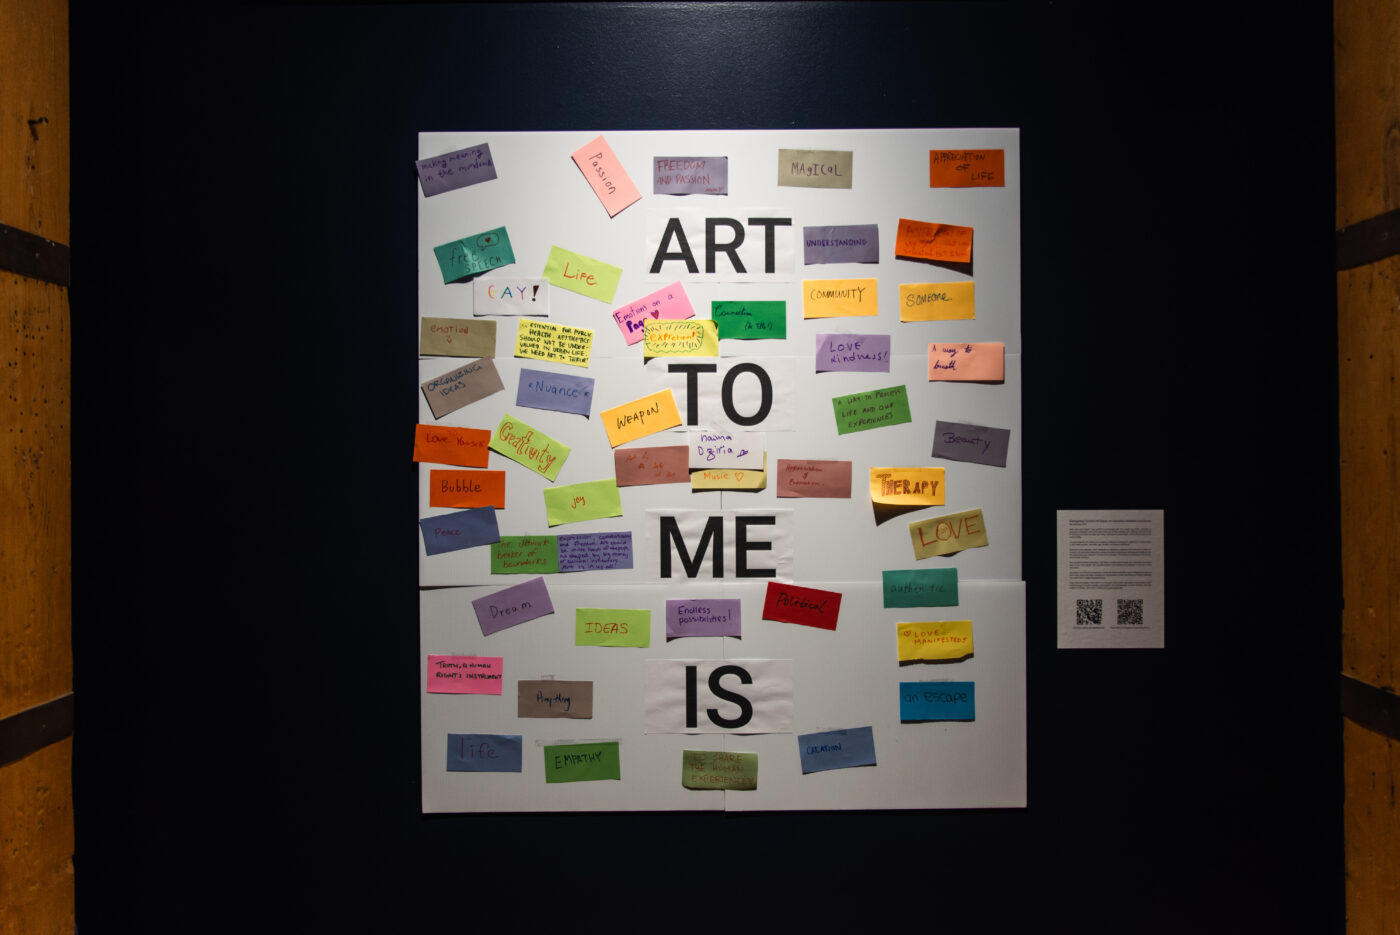 Sticky note responses on a board with large text that reads, "ART TO ME IS."